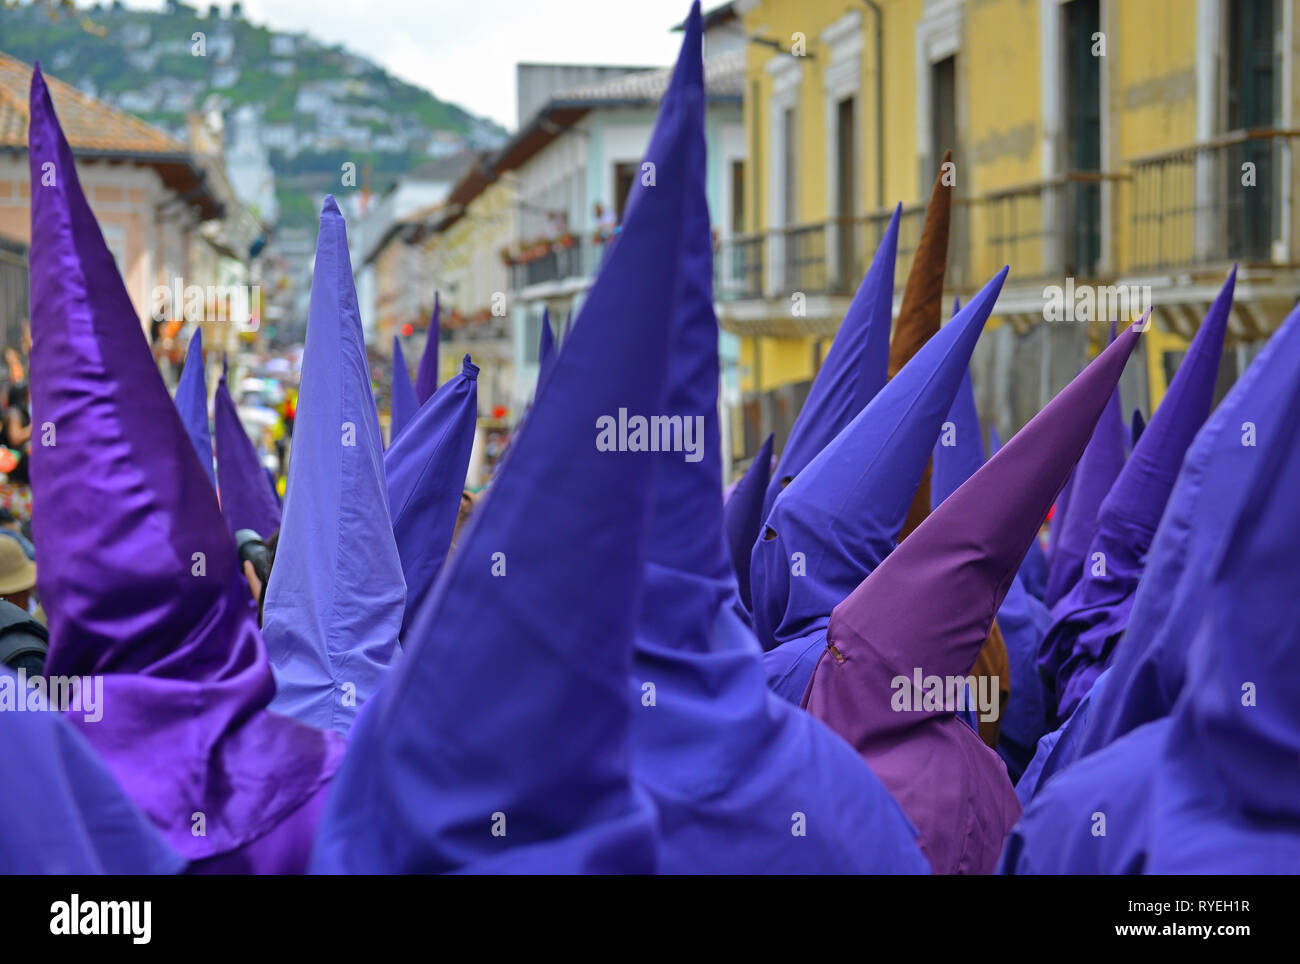 The purple penitents called the cucuruchos walking in the streets of Quito during the Easter procession in purple clothing on Holy Friday, Ecuador. Stock Photo